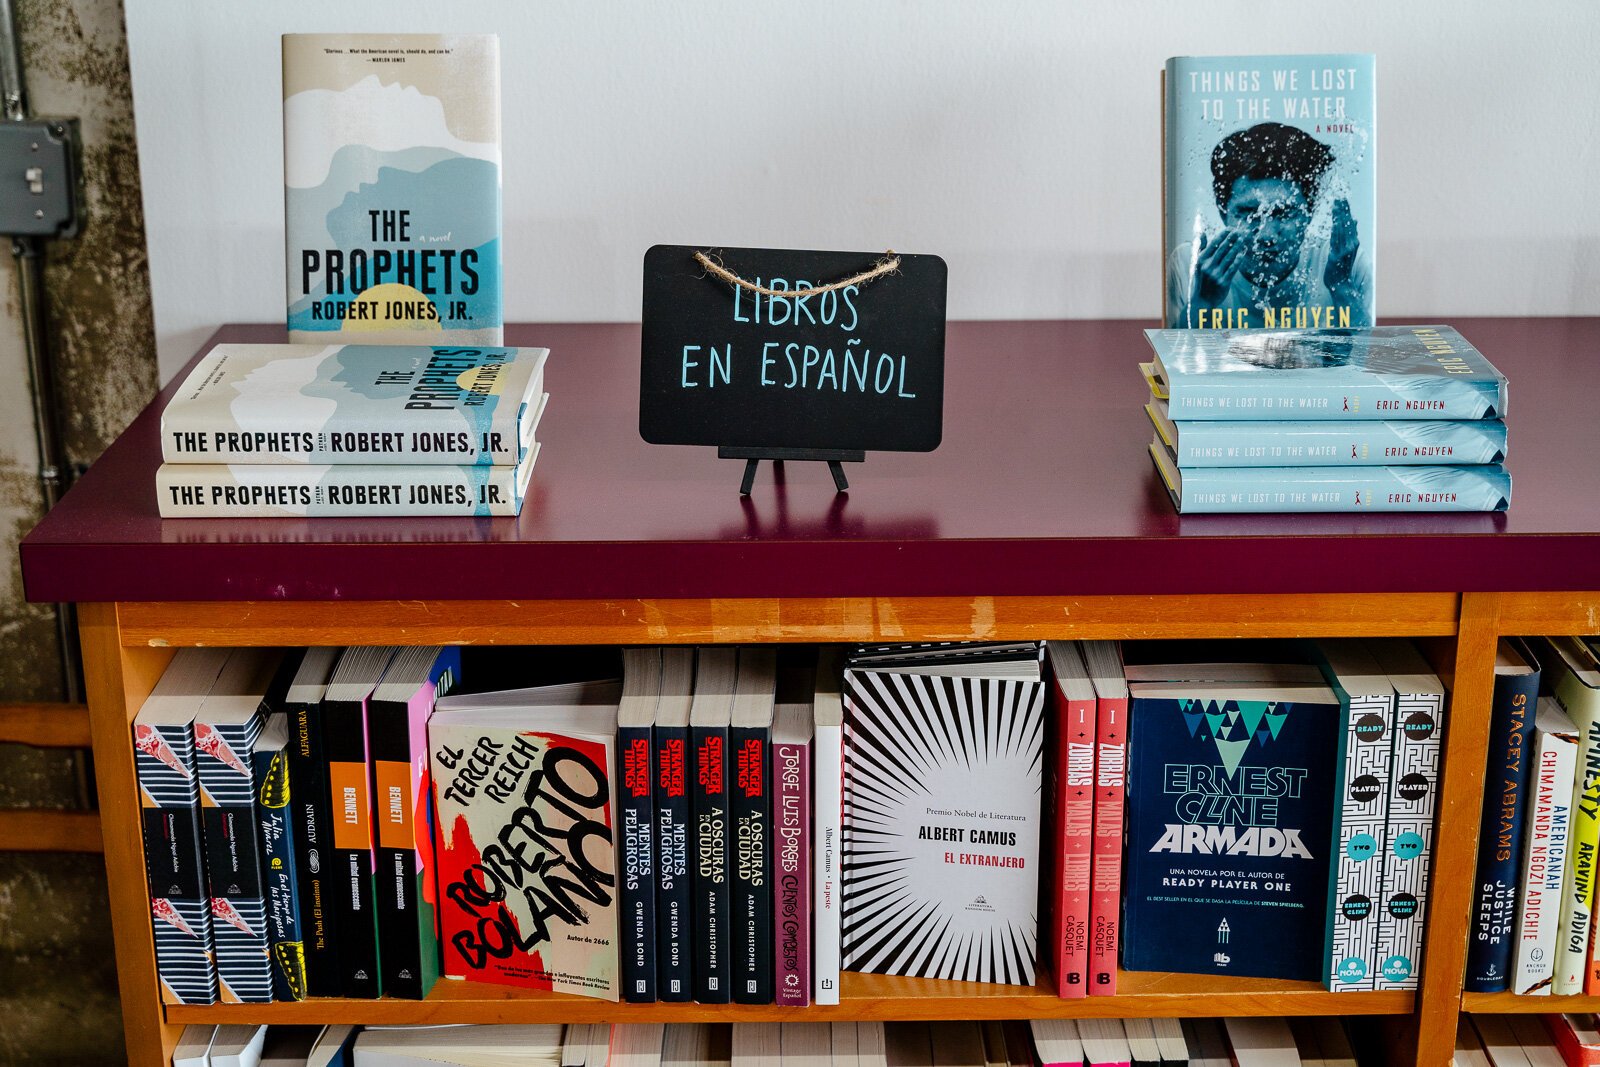 The store features mainstream reading in Spanish